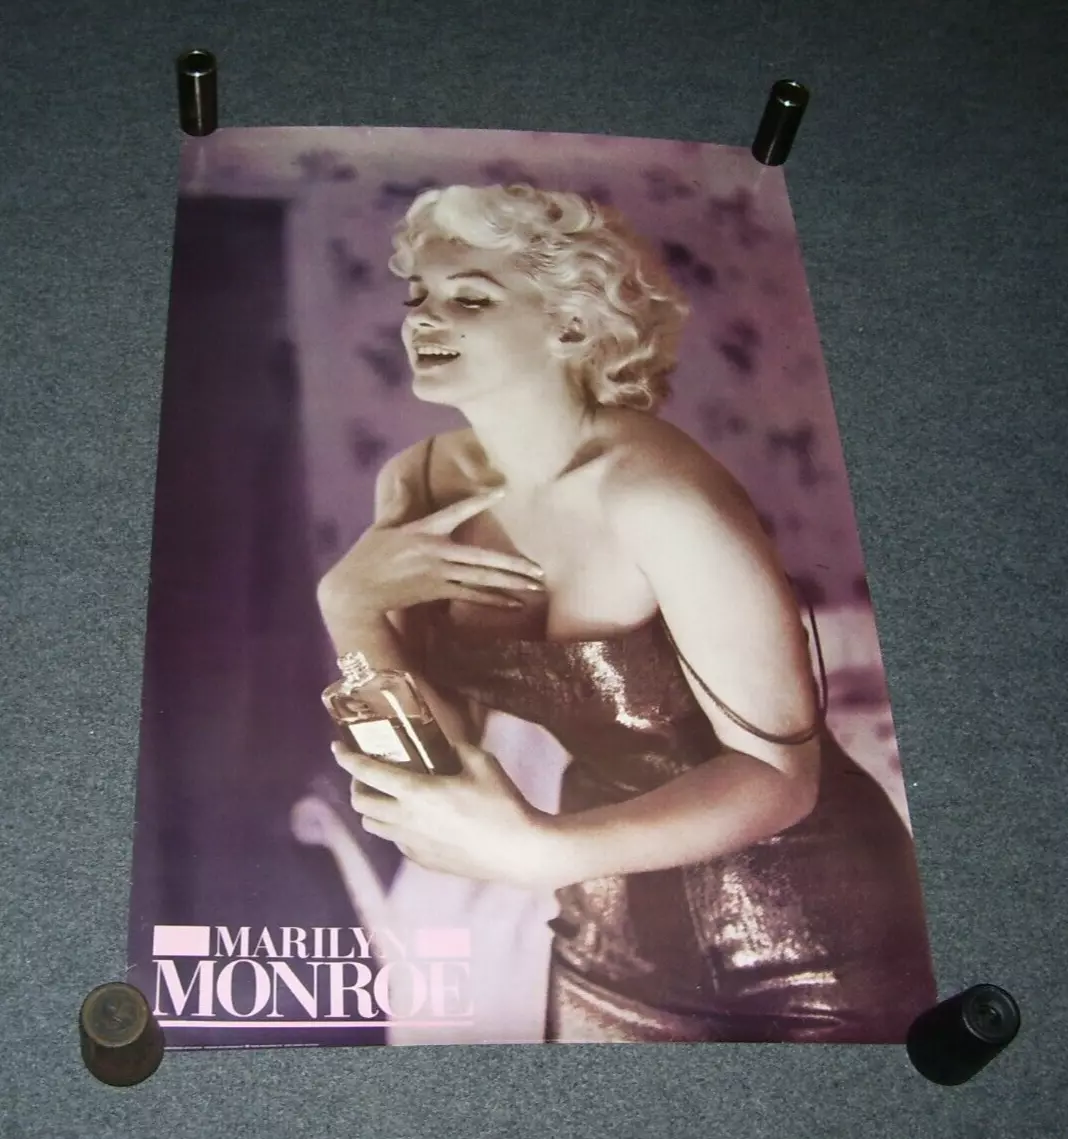 Marilyn Monroe Chanel No. 5 Poster 1988 Lithograph Ed Feingersh, Rolled